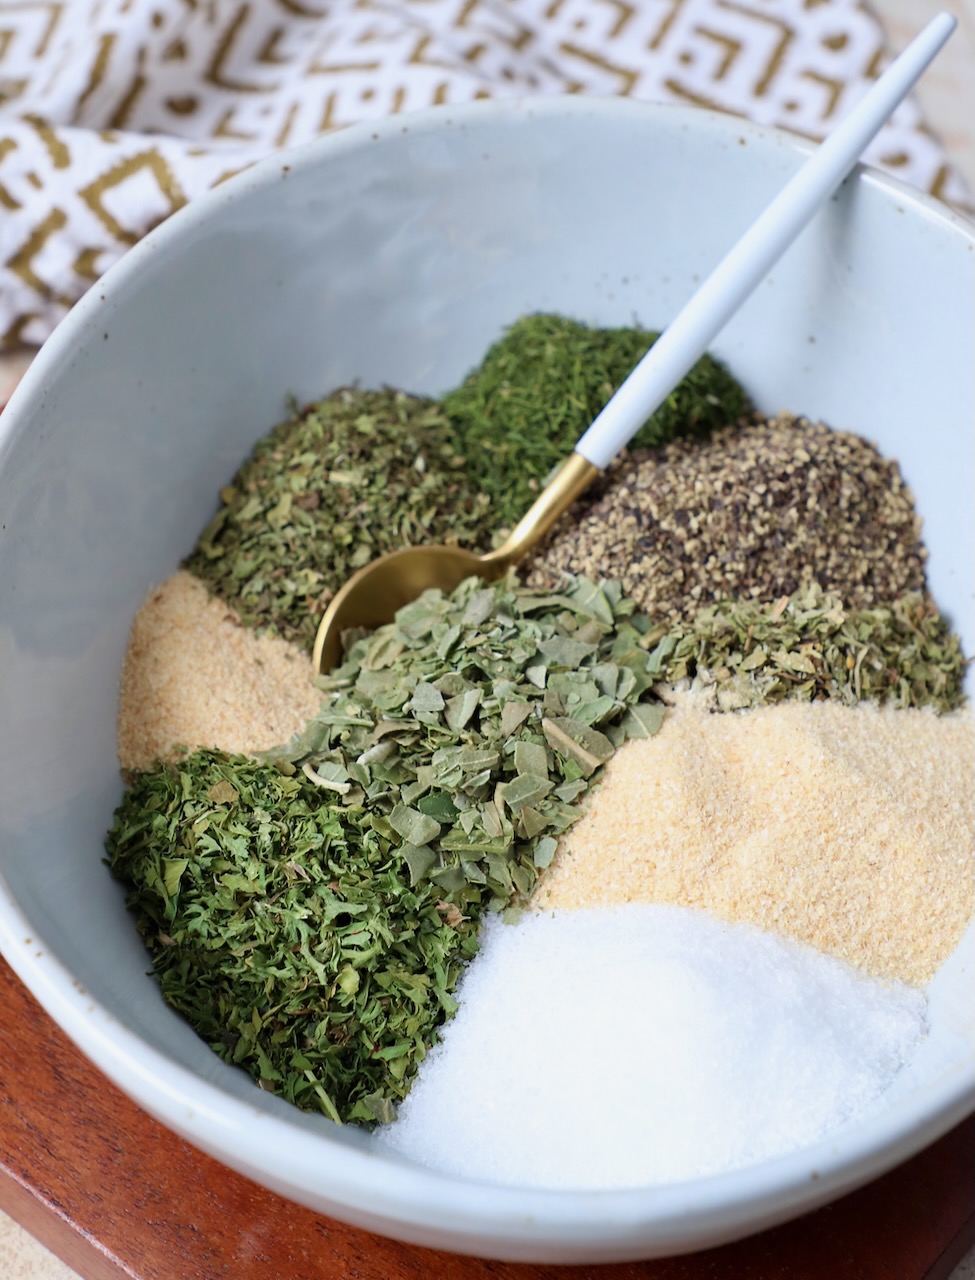 dried herbs and spices separated in bowl with small spoon